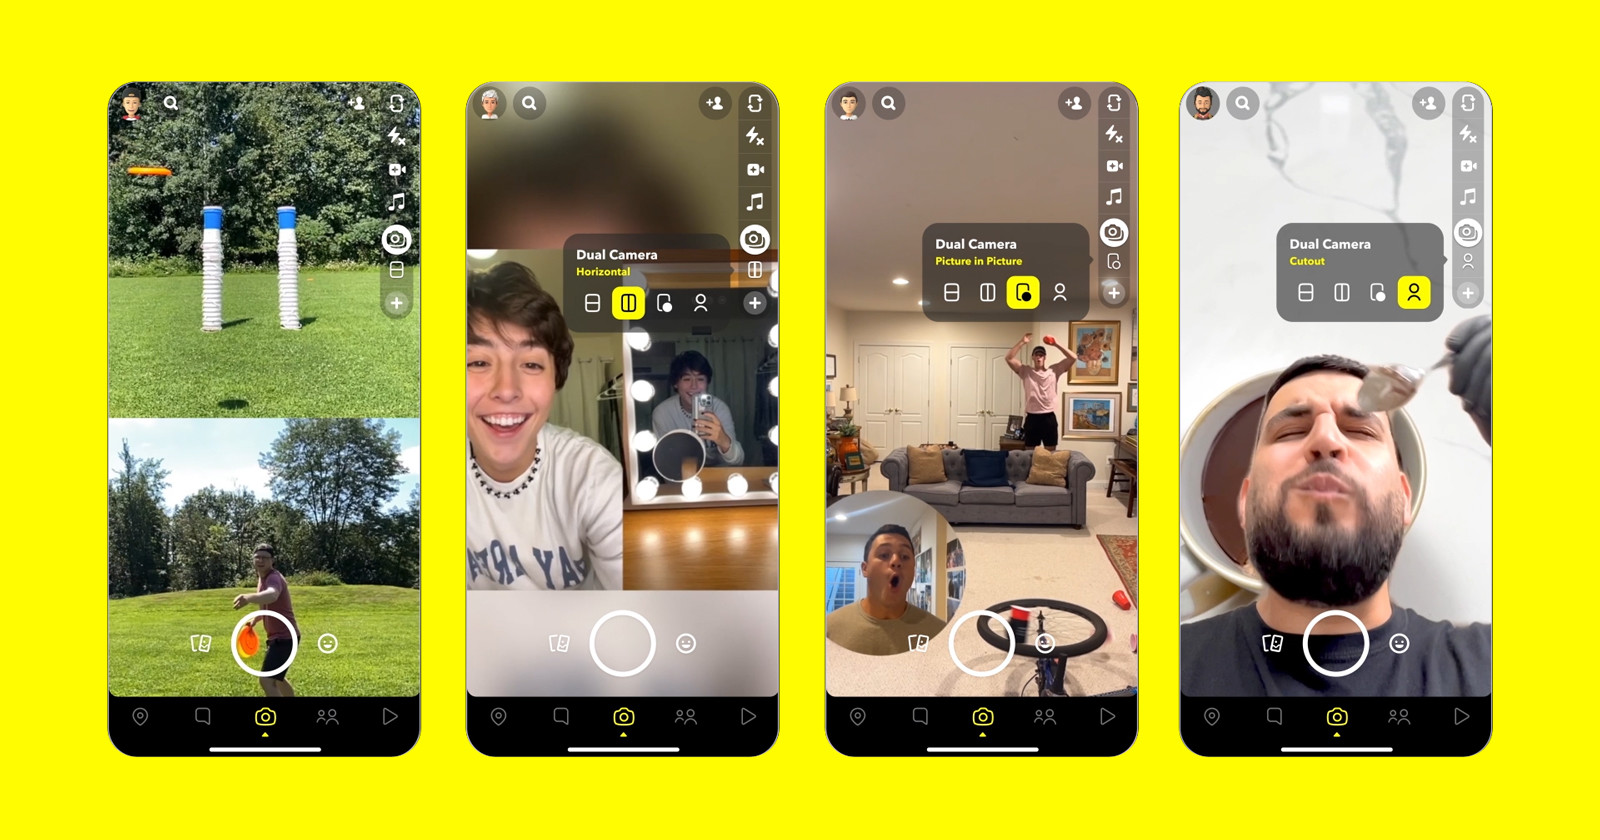  snapchat adds bereal-like dual camera feature 